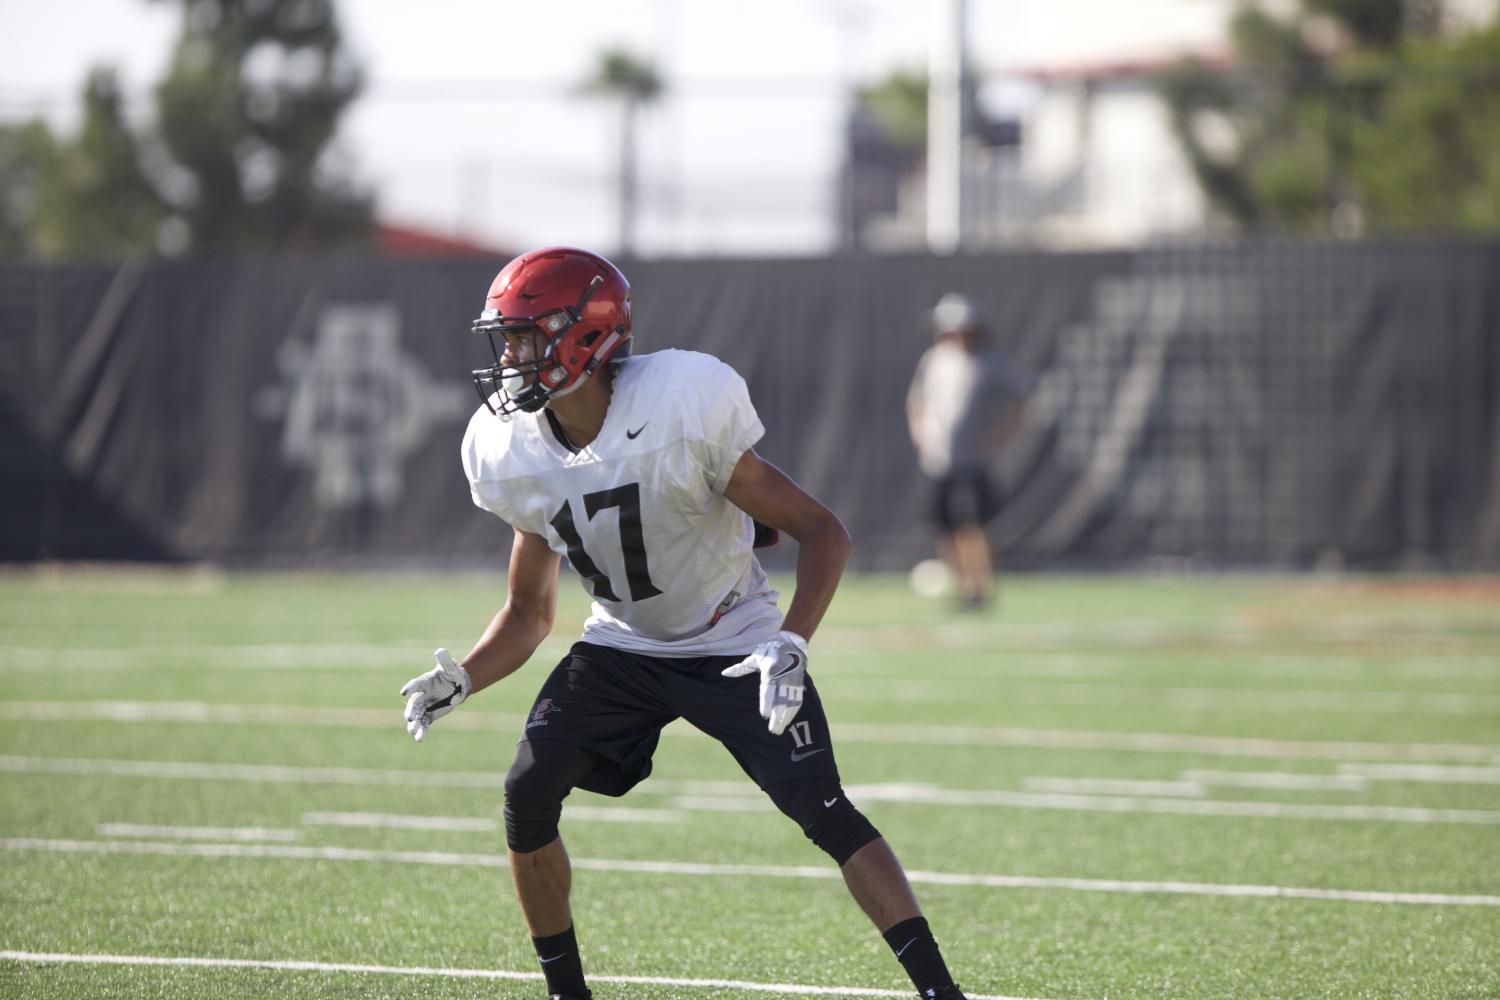 SDSU+redshirt+sophomore+cornerback+Ron+Smith+participating+in+a+drill+during+fall+practice.+